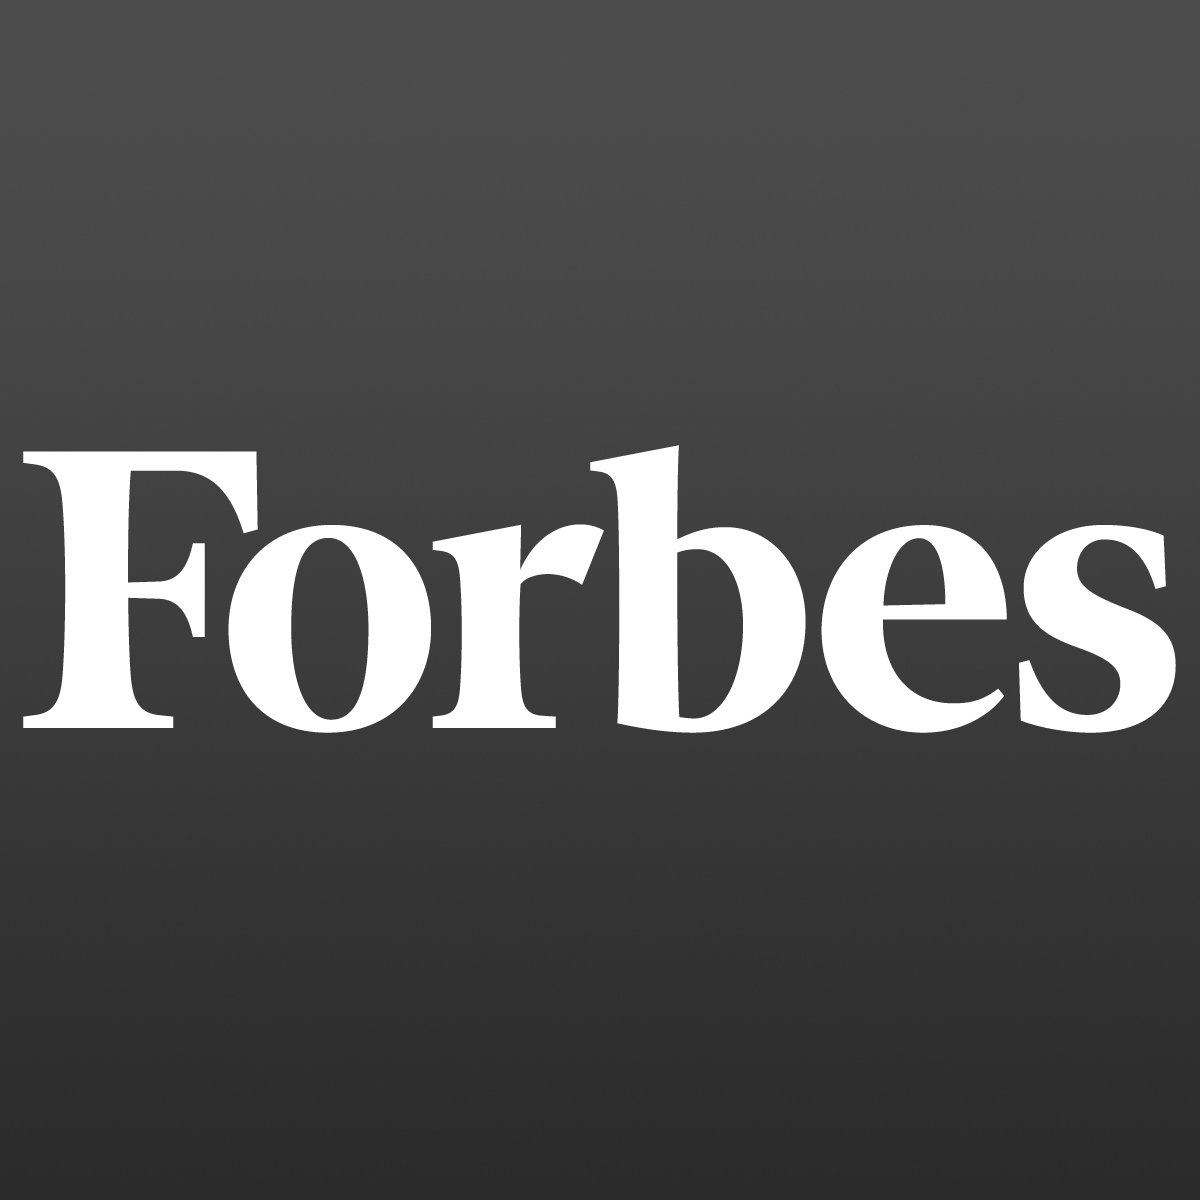 Ged Lawyers Featured in Forbes Magazine for Taking on Corporate America